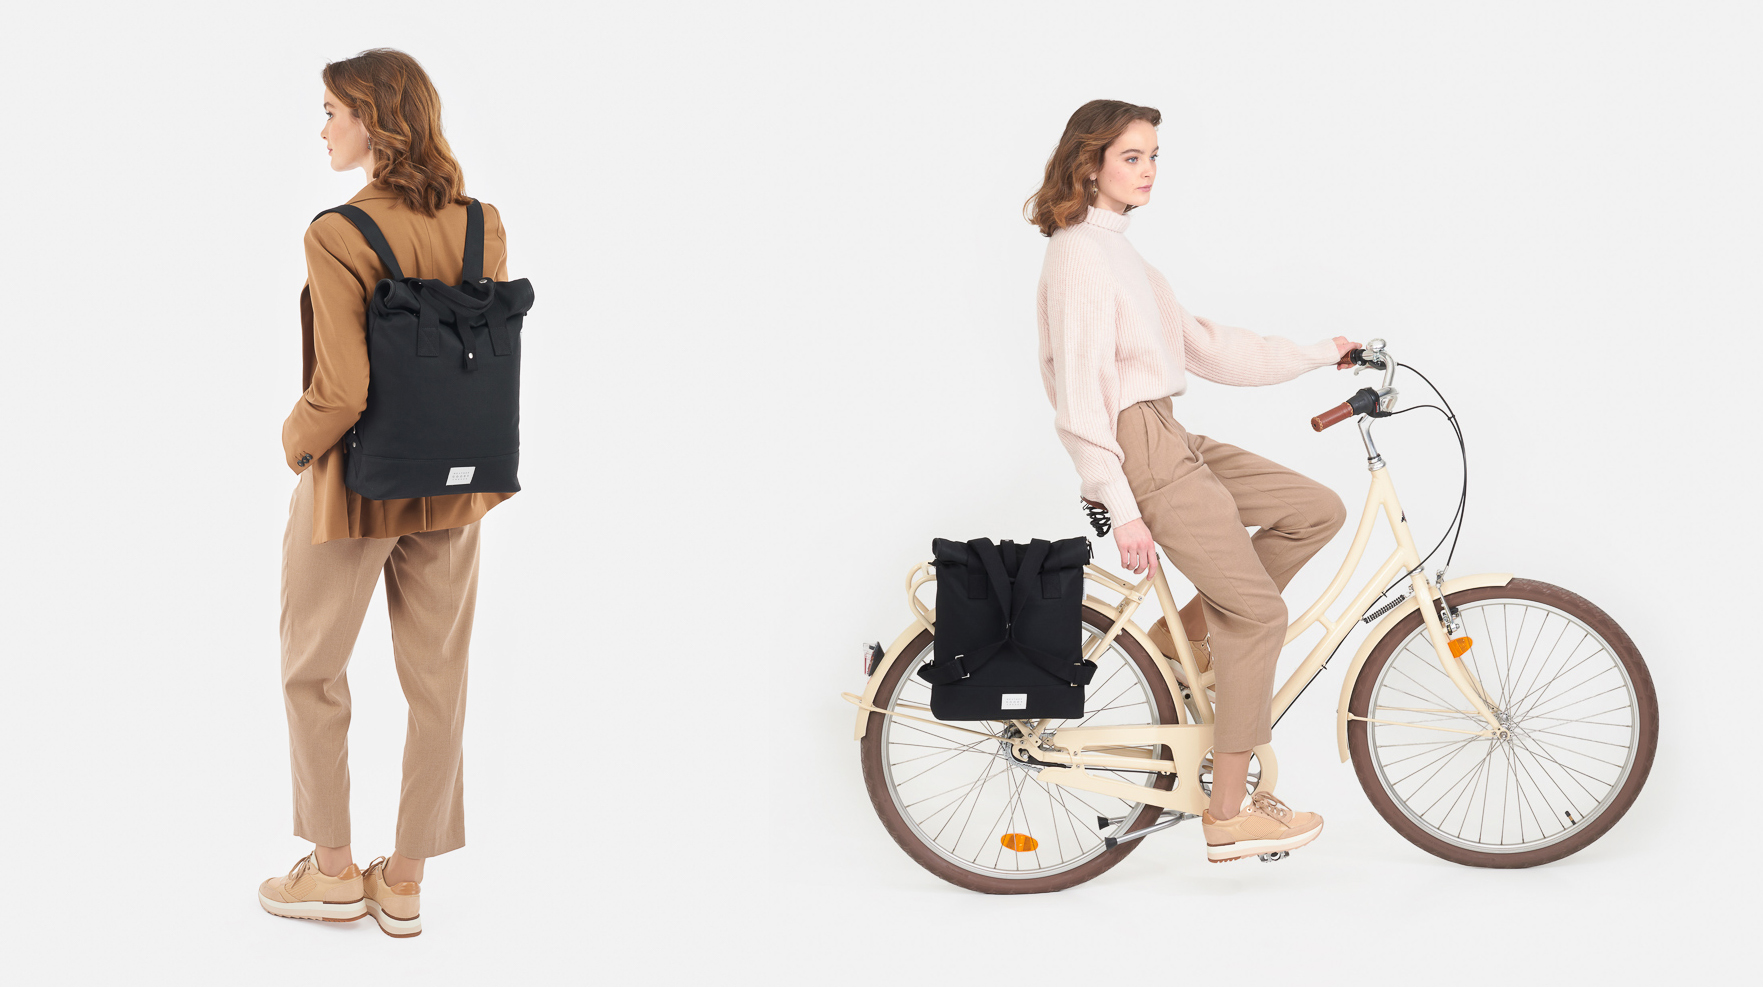 Cyclechic - Helping you to cycle in style - women's cycling accessories